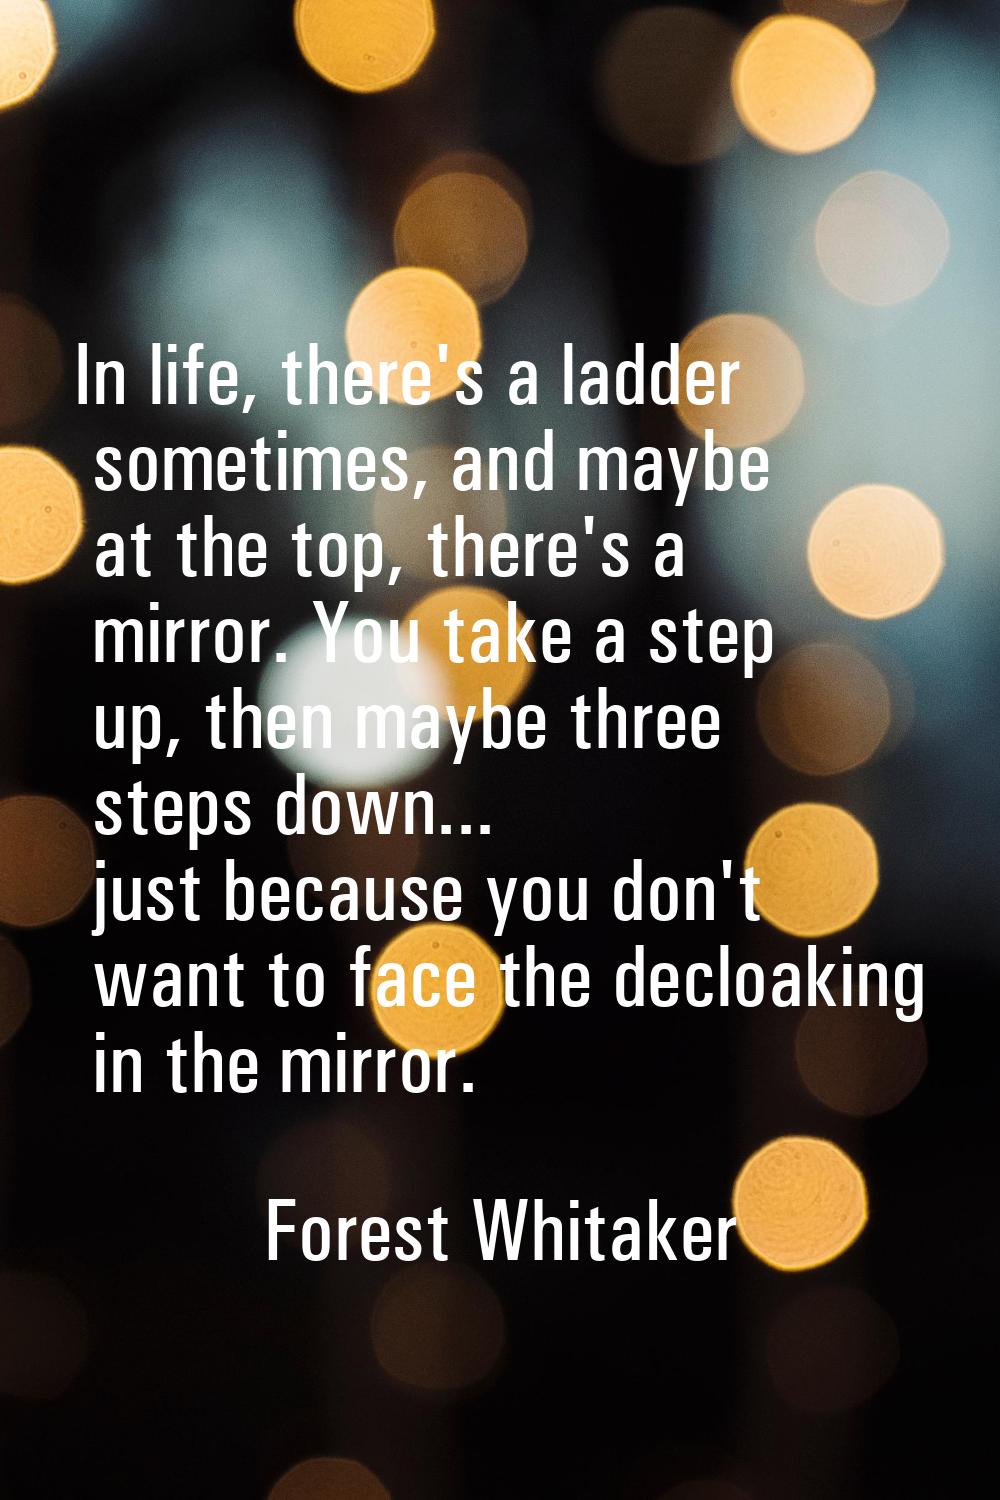 In life, there's a ladder sometimes, and maybe at the top, there's a mirror. You take a step up, th